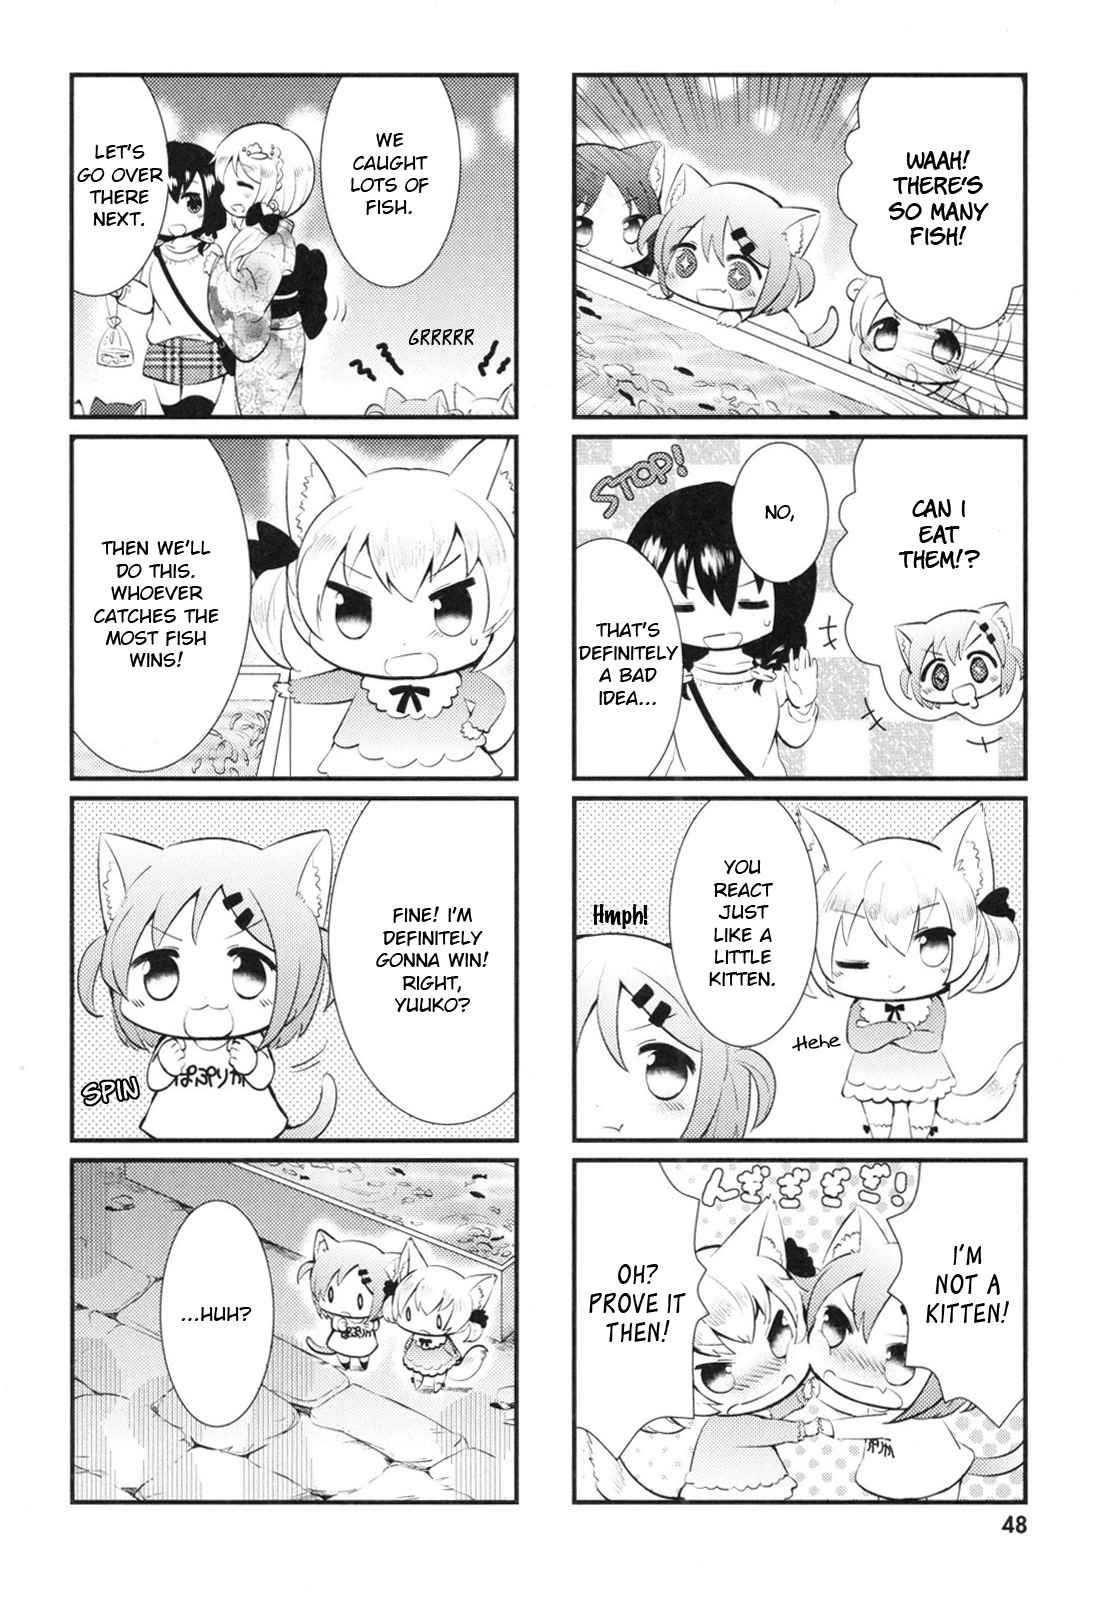 Nyanko Days Vol. 1 Ch. 5 Cats And The Summer Festival